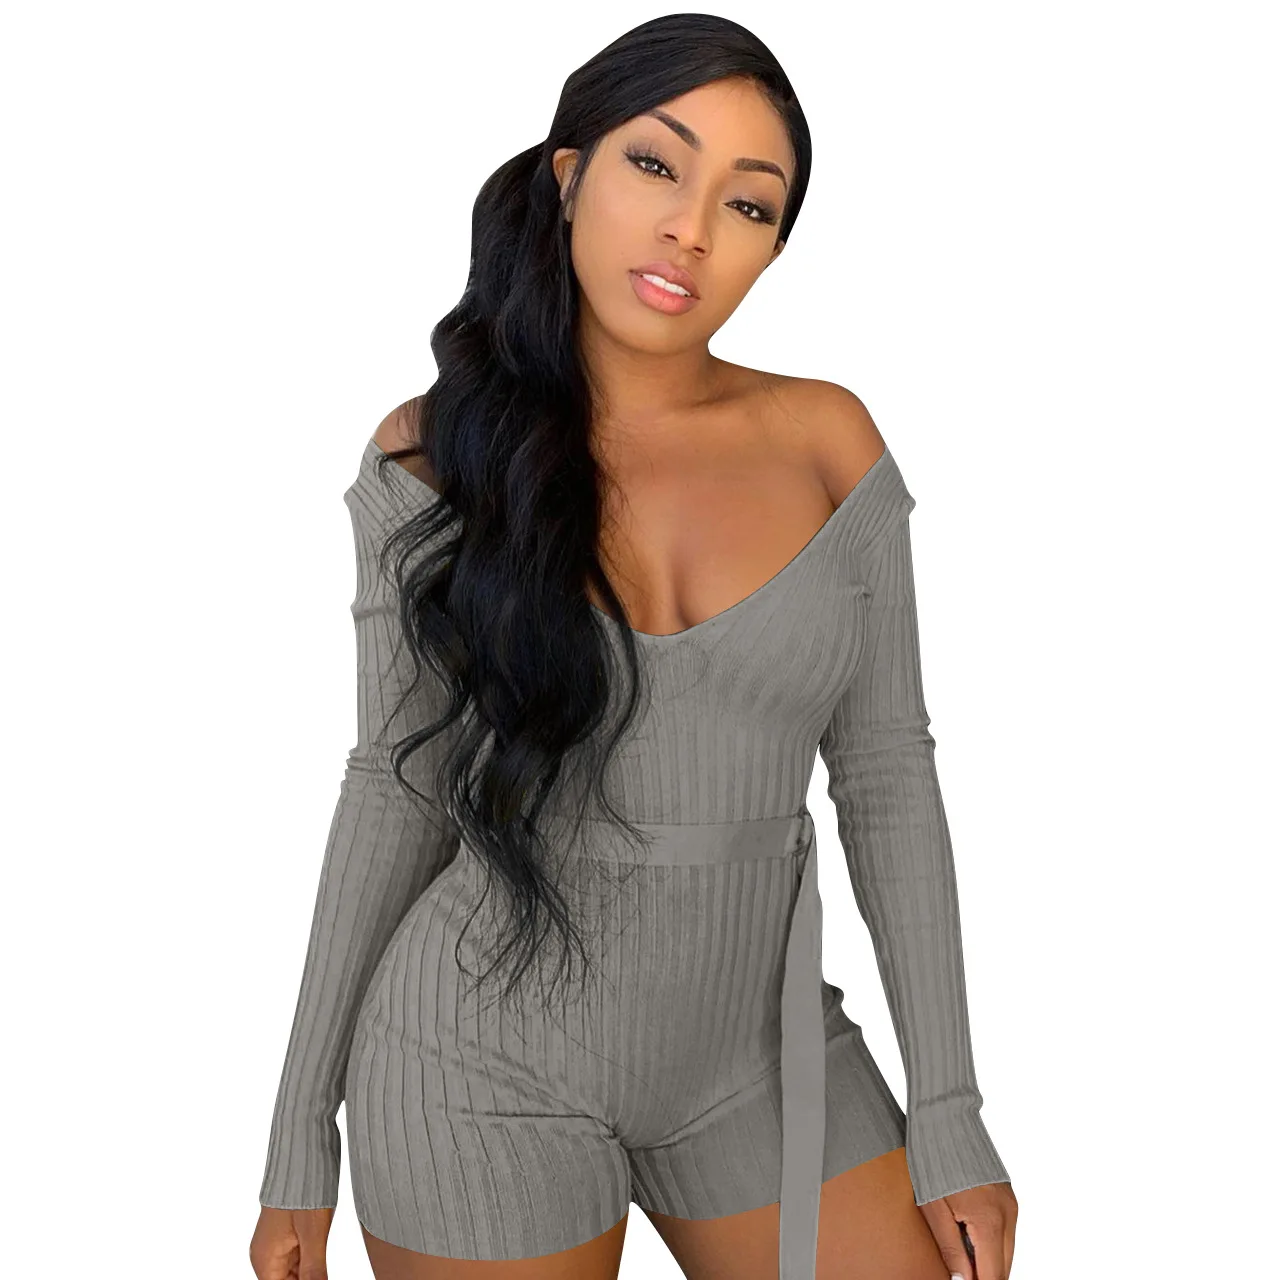 Hot sale onesie for women pajamas pit fabric long sleeve sexy V-neck jumpsuit bodysuit playsuit with sash belt